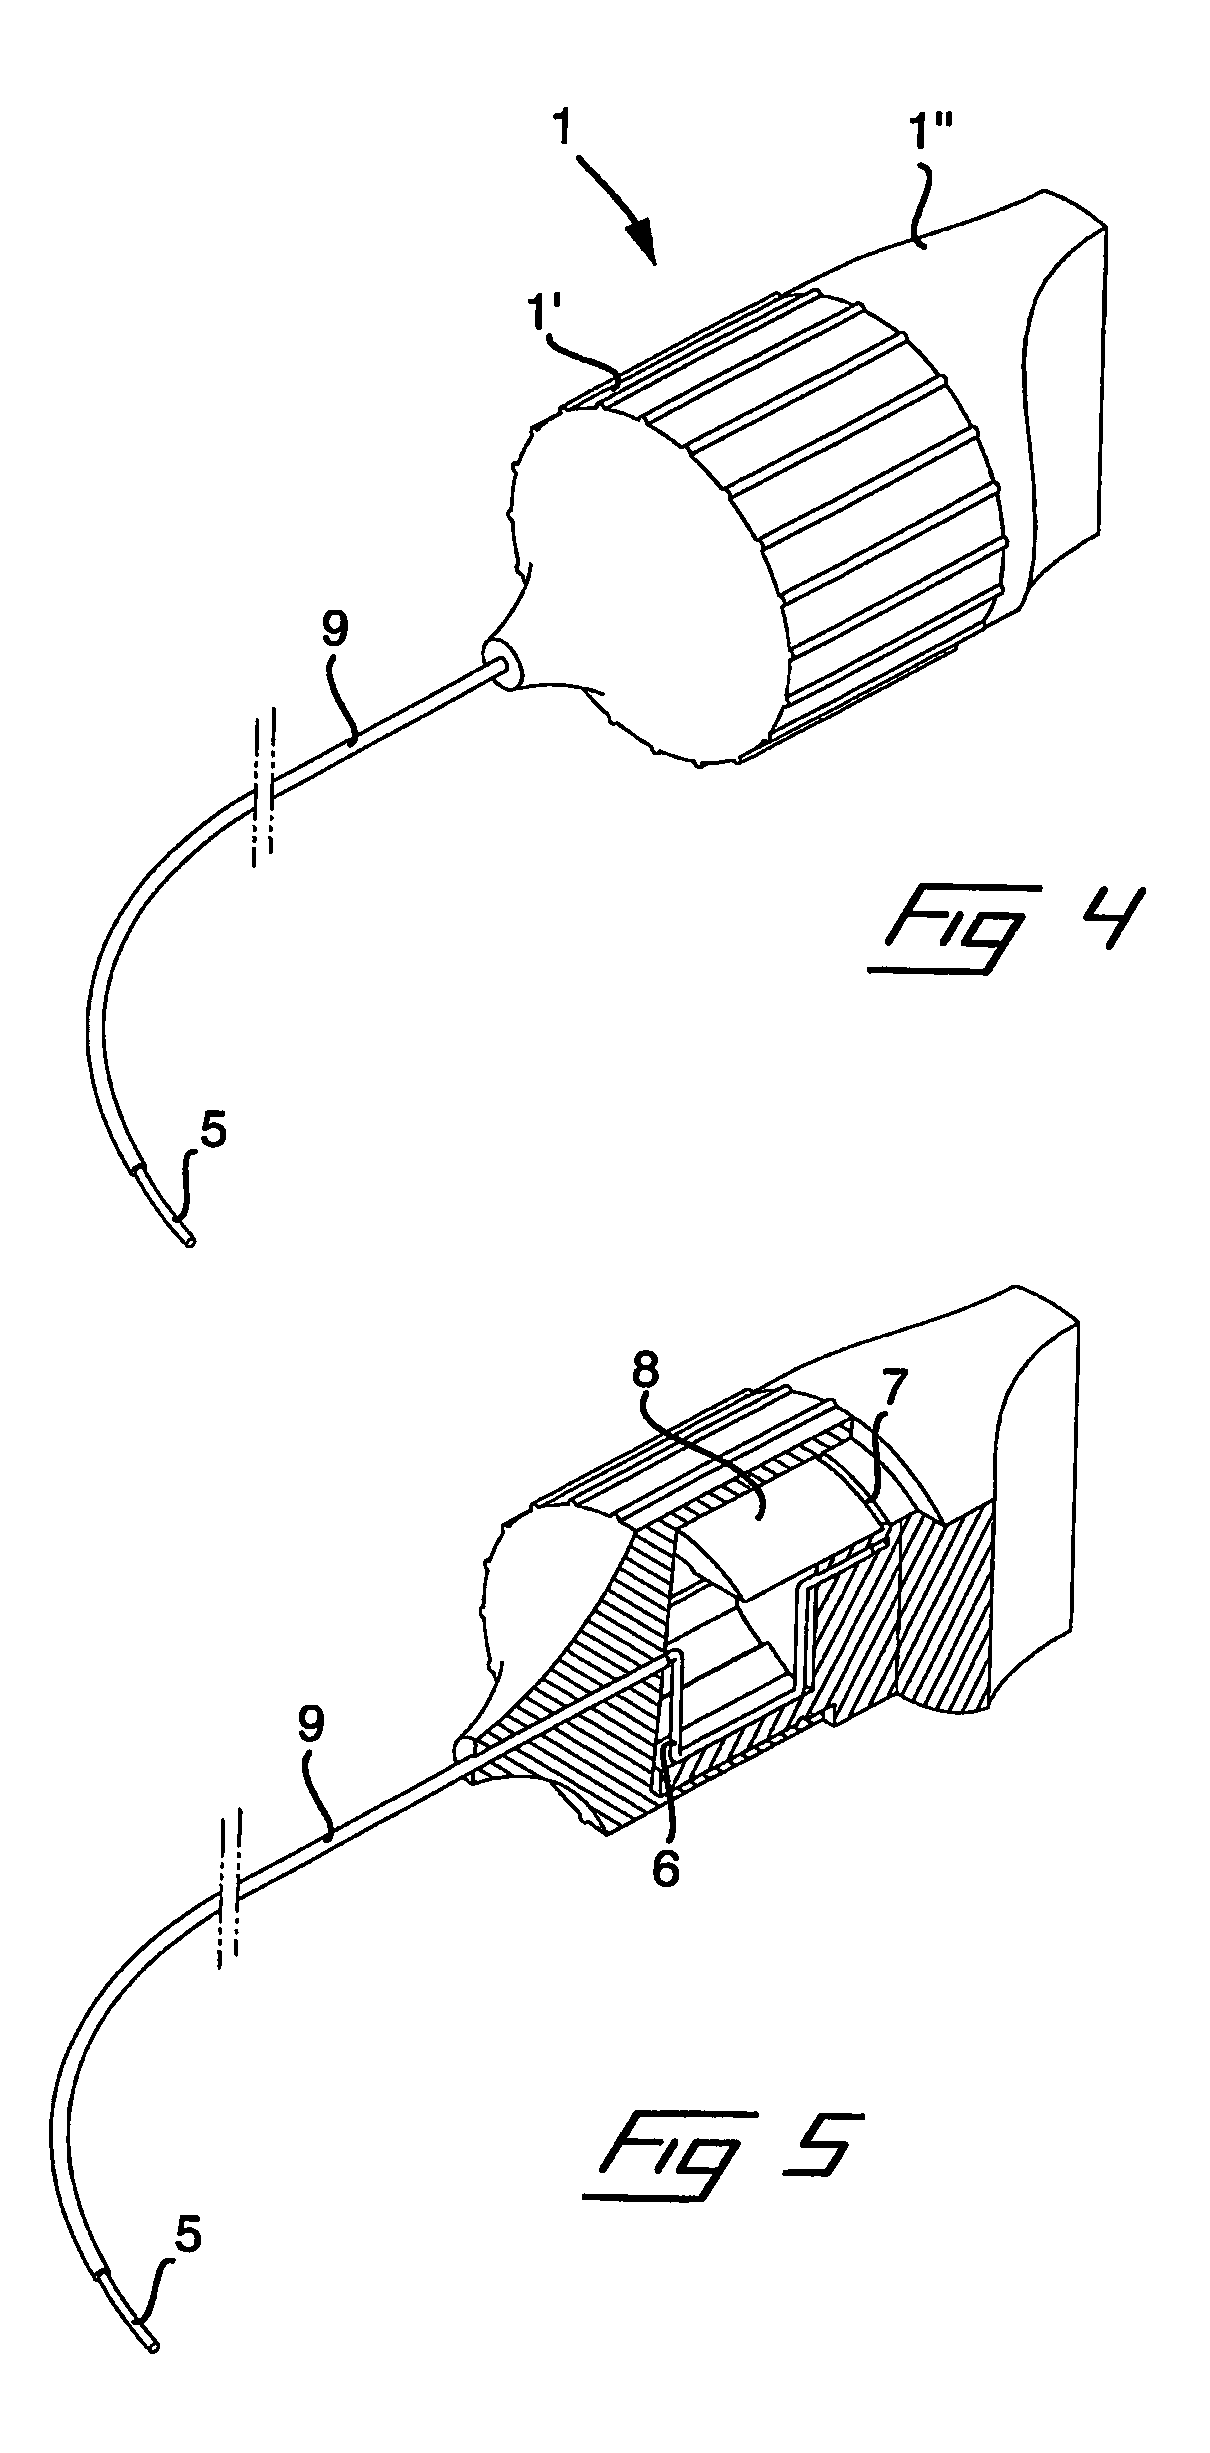 Tool and a method for attaching a cardiac stimulator lead at a desired position inside a heart